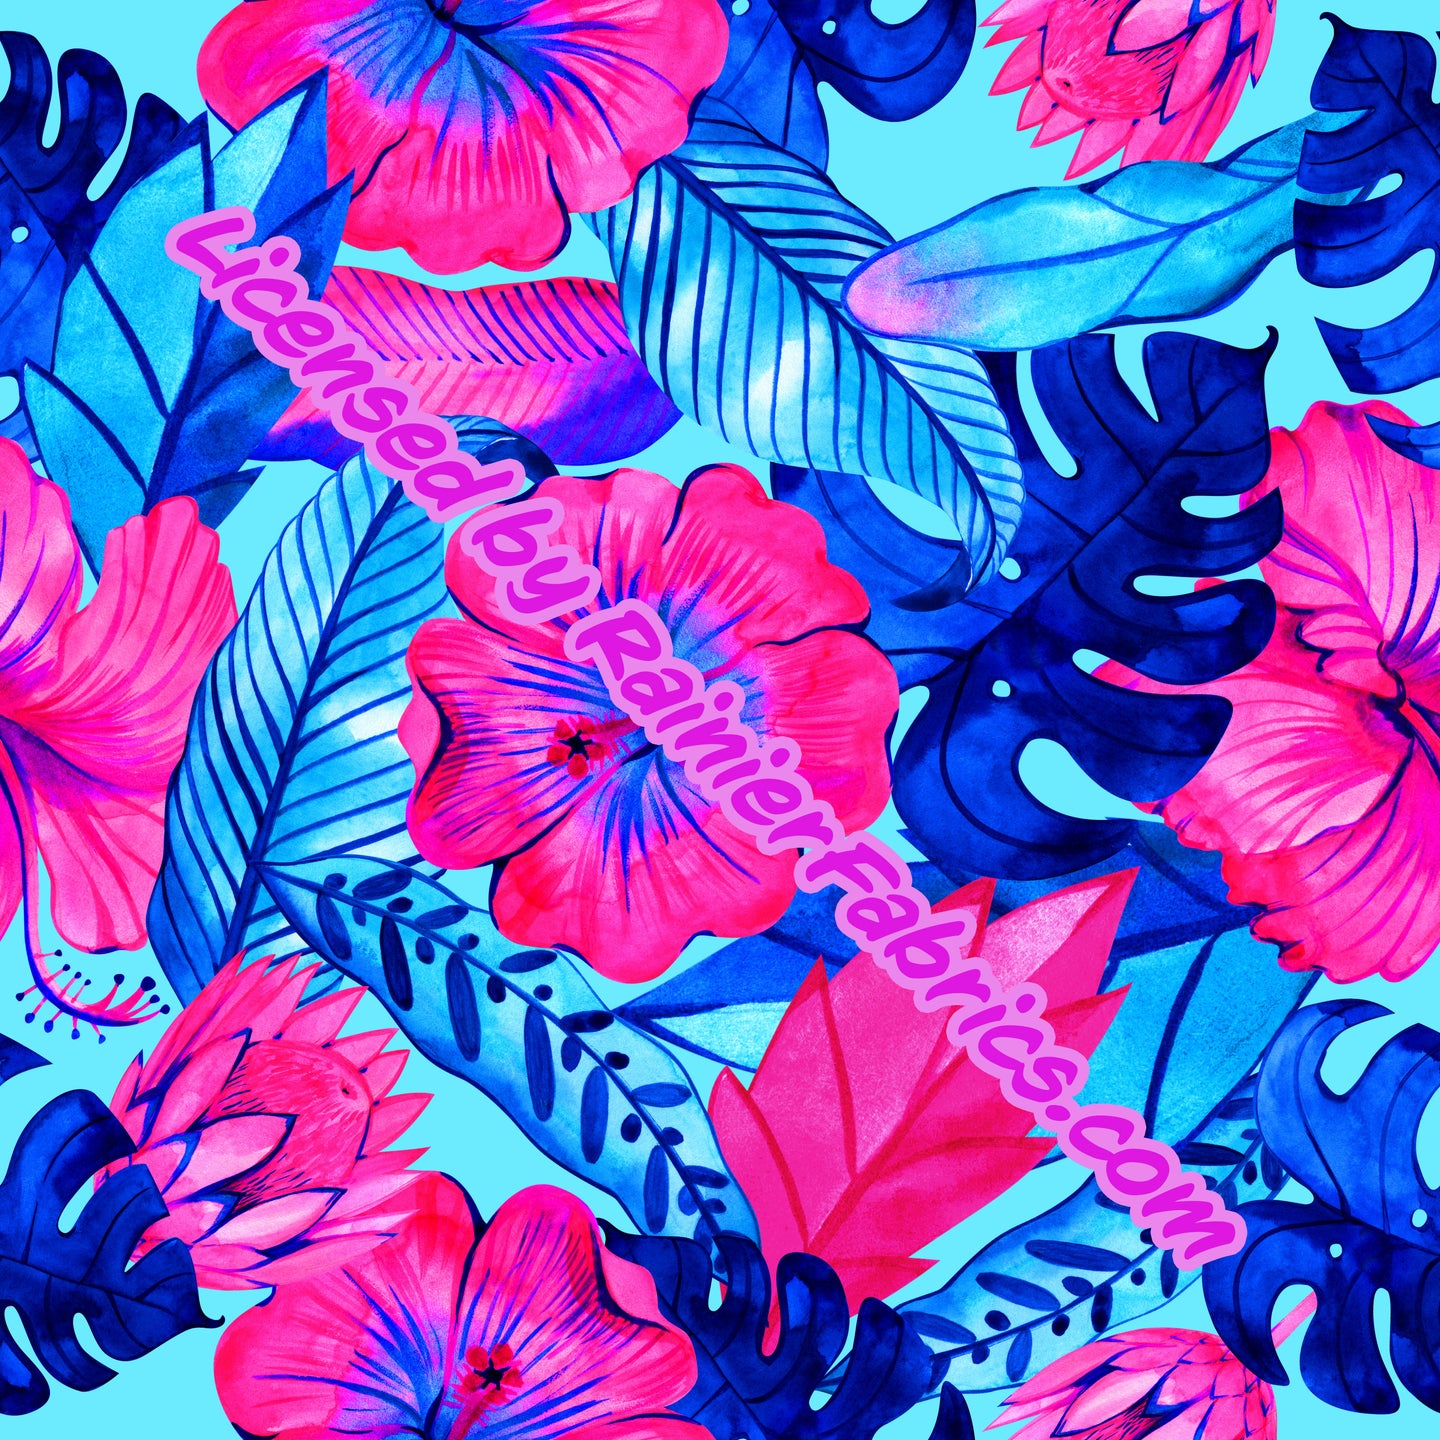 Neon Floral - 2-5 day turnaround - Order by 1/2 yard; Description of bases below